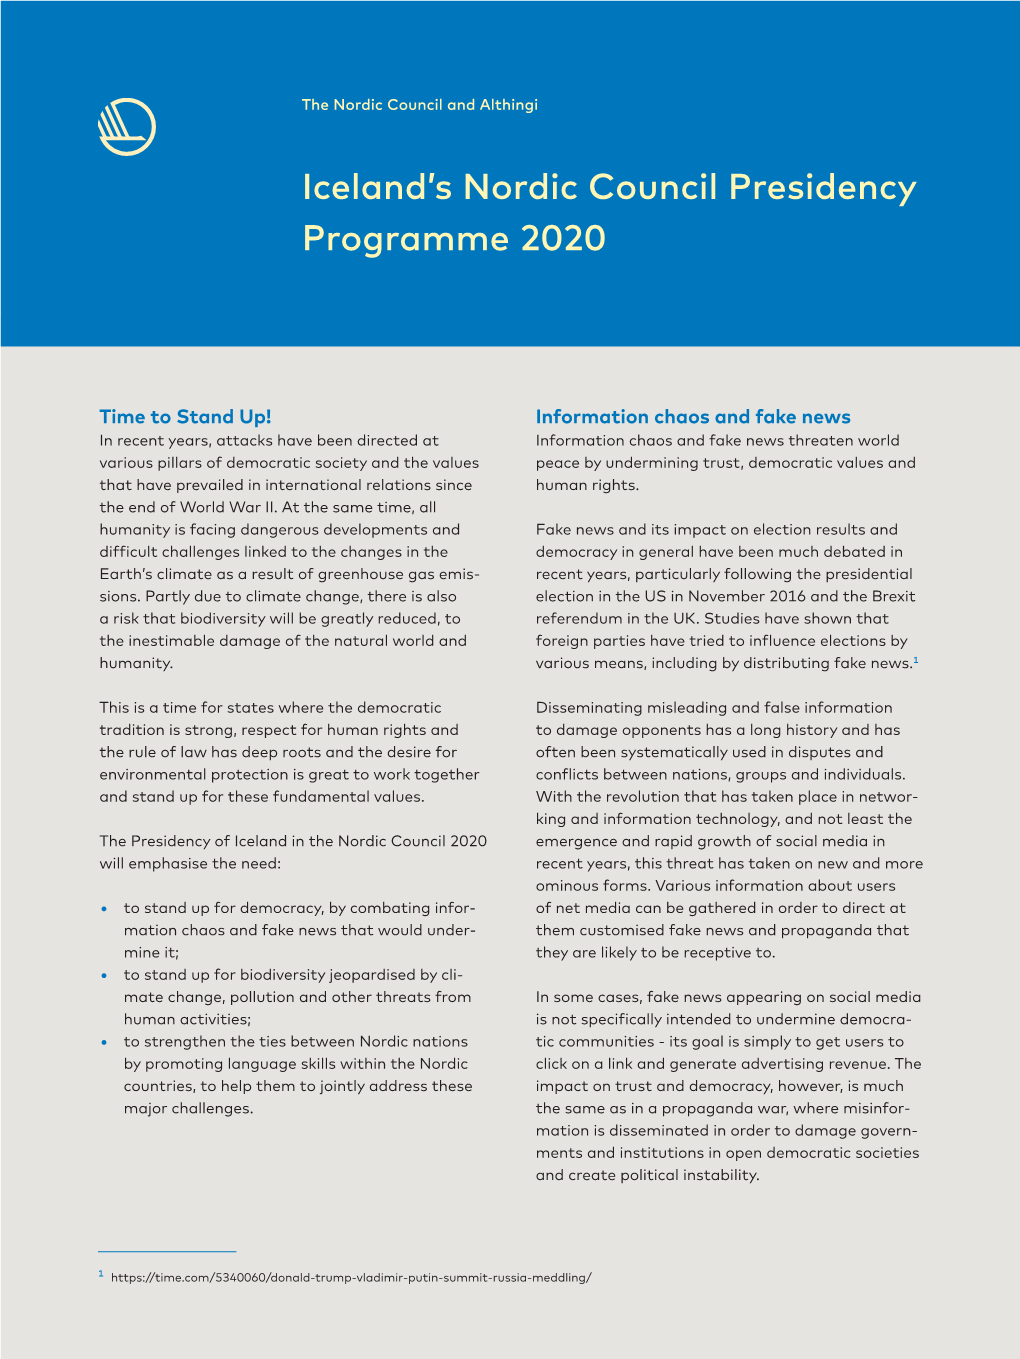 Iceland's Nordic Council Presidency Programme 2020